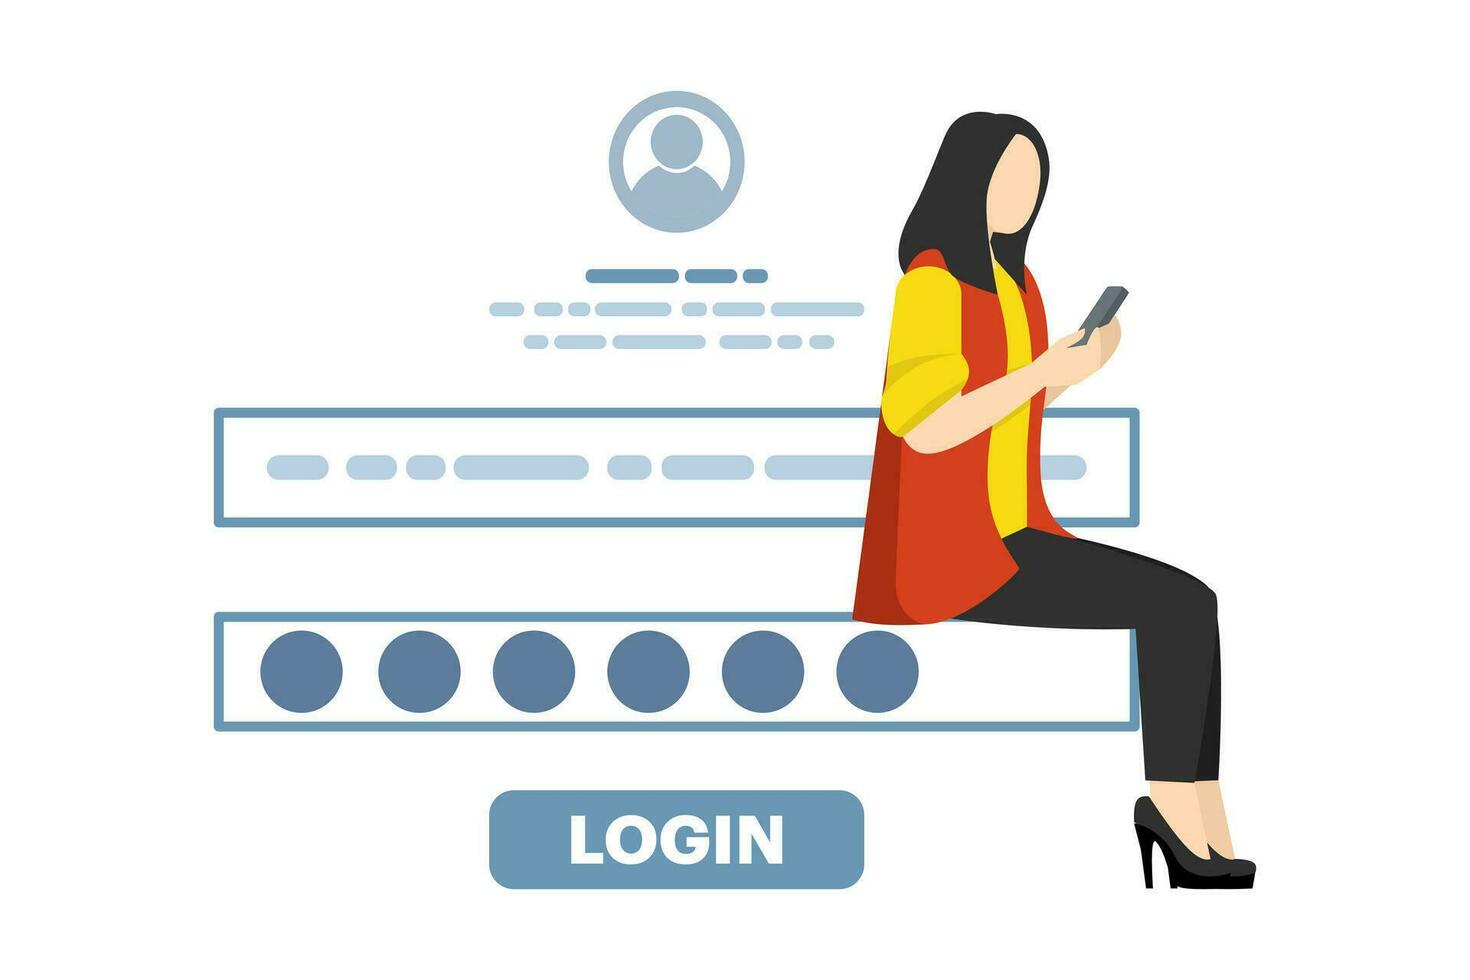 concept of online account registration and login. woman registering or logging into online account with user interface. Secure login and password. flat vector illustration on white background.